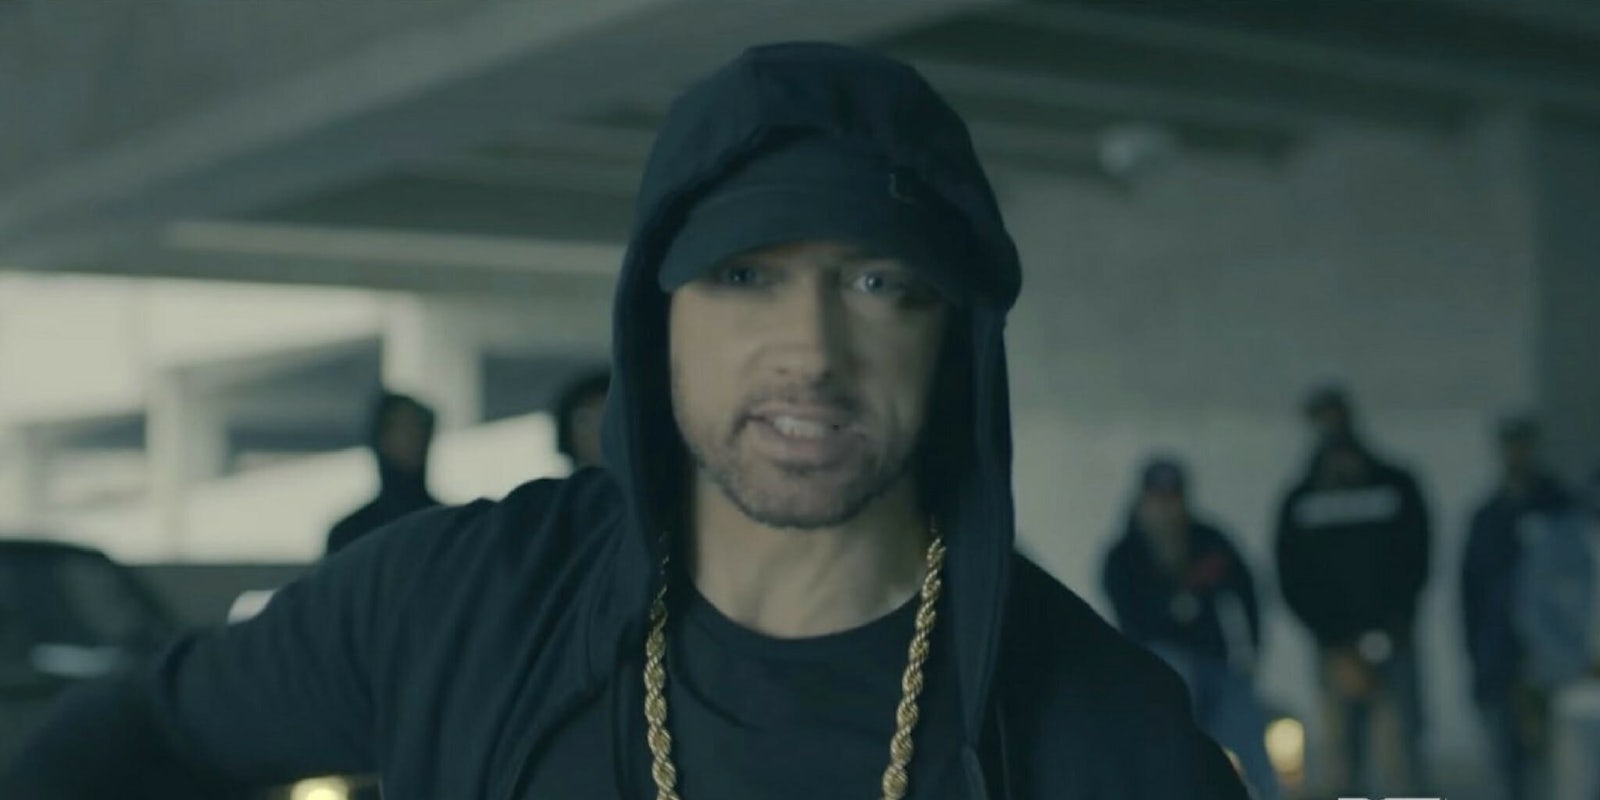 Eminem wishes Donald Trump would respond to his diss track.